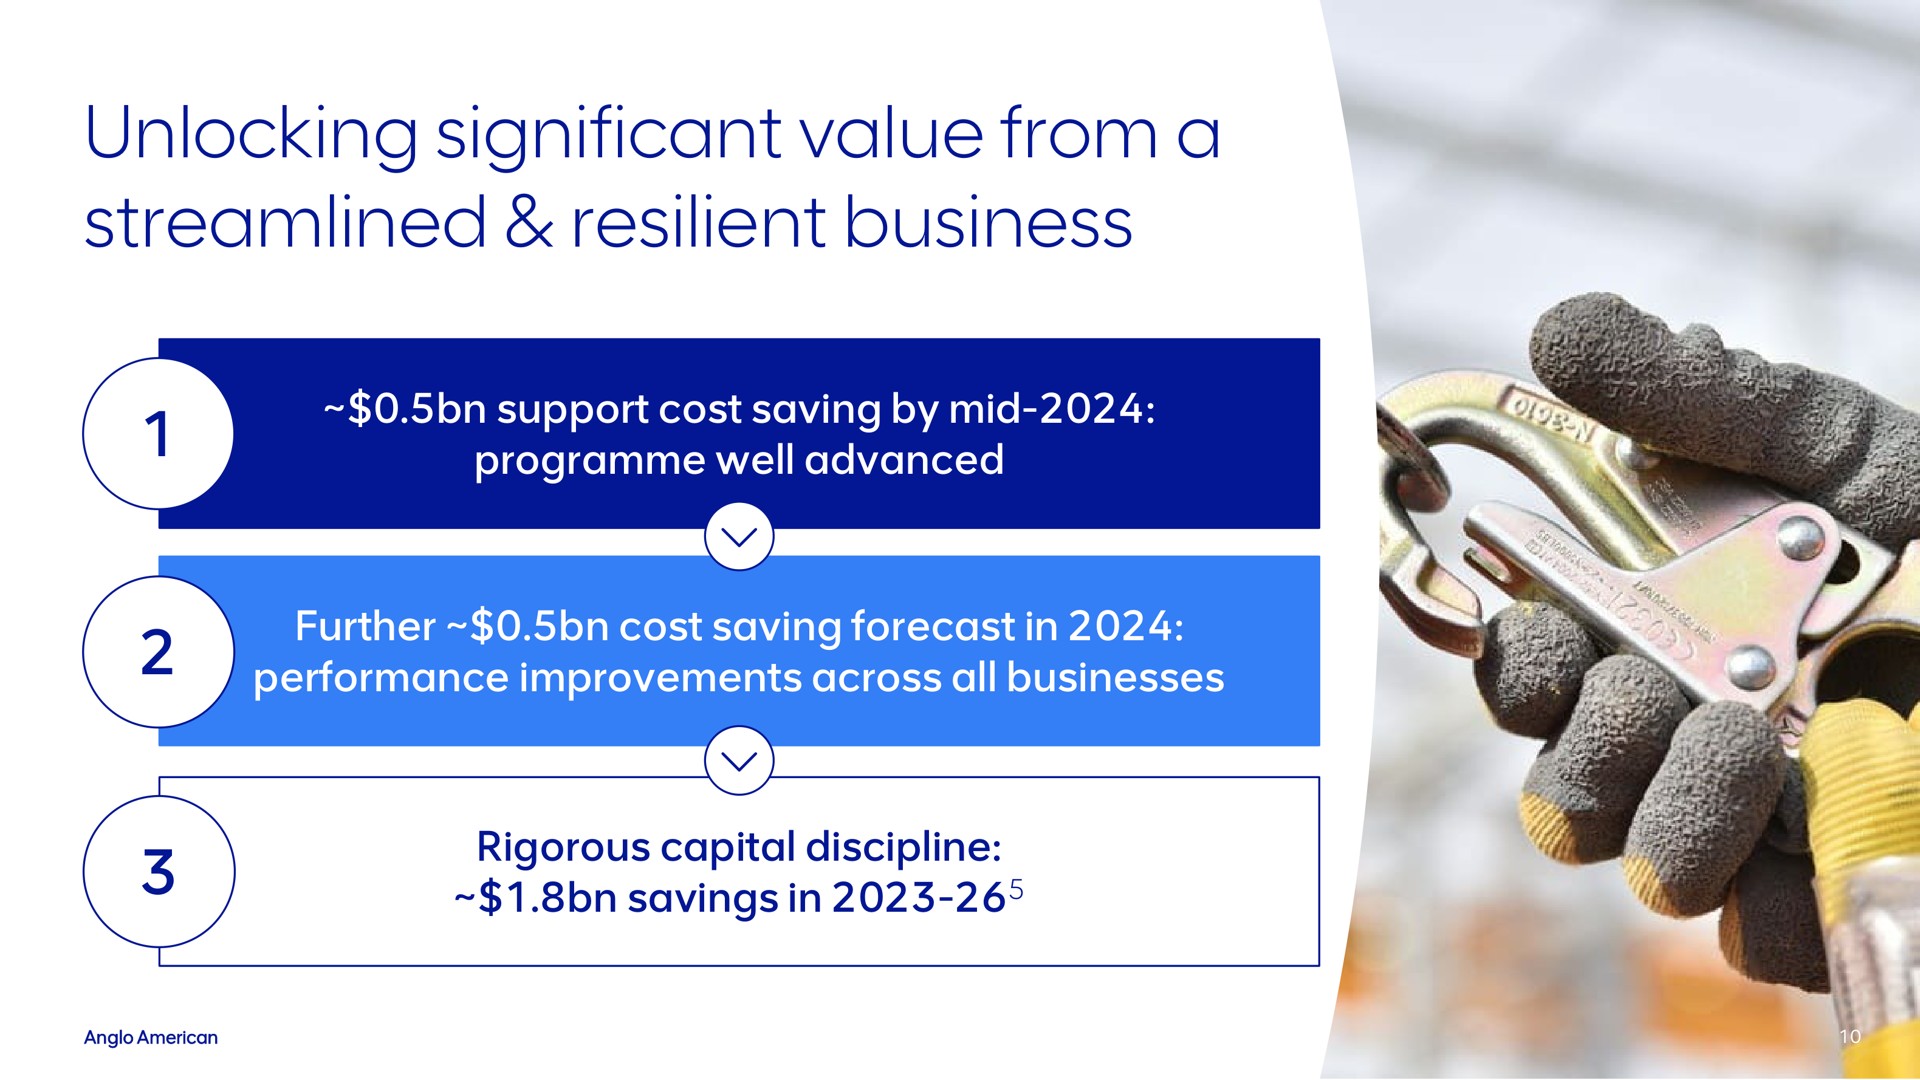 unlocking significant value from a streamlined resilient business | AngloAmerican